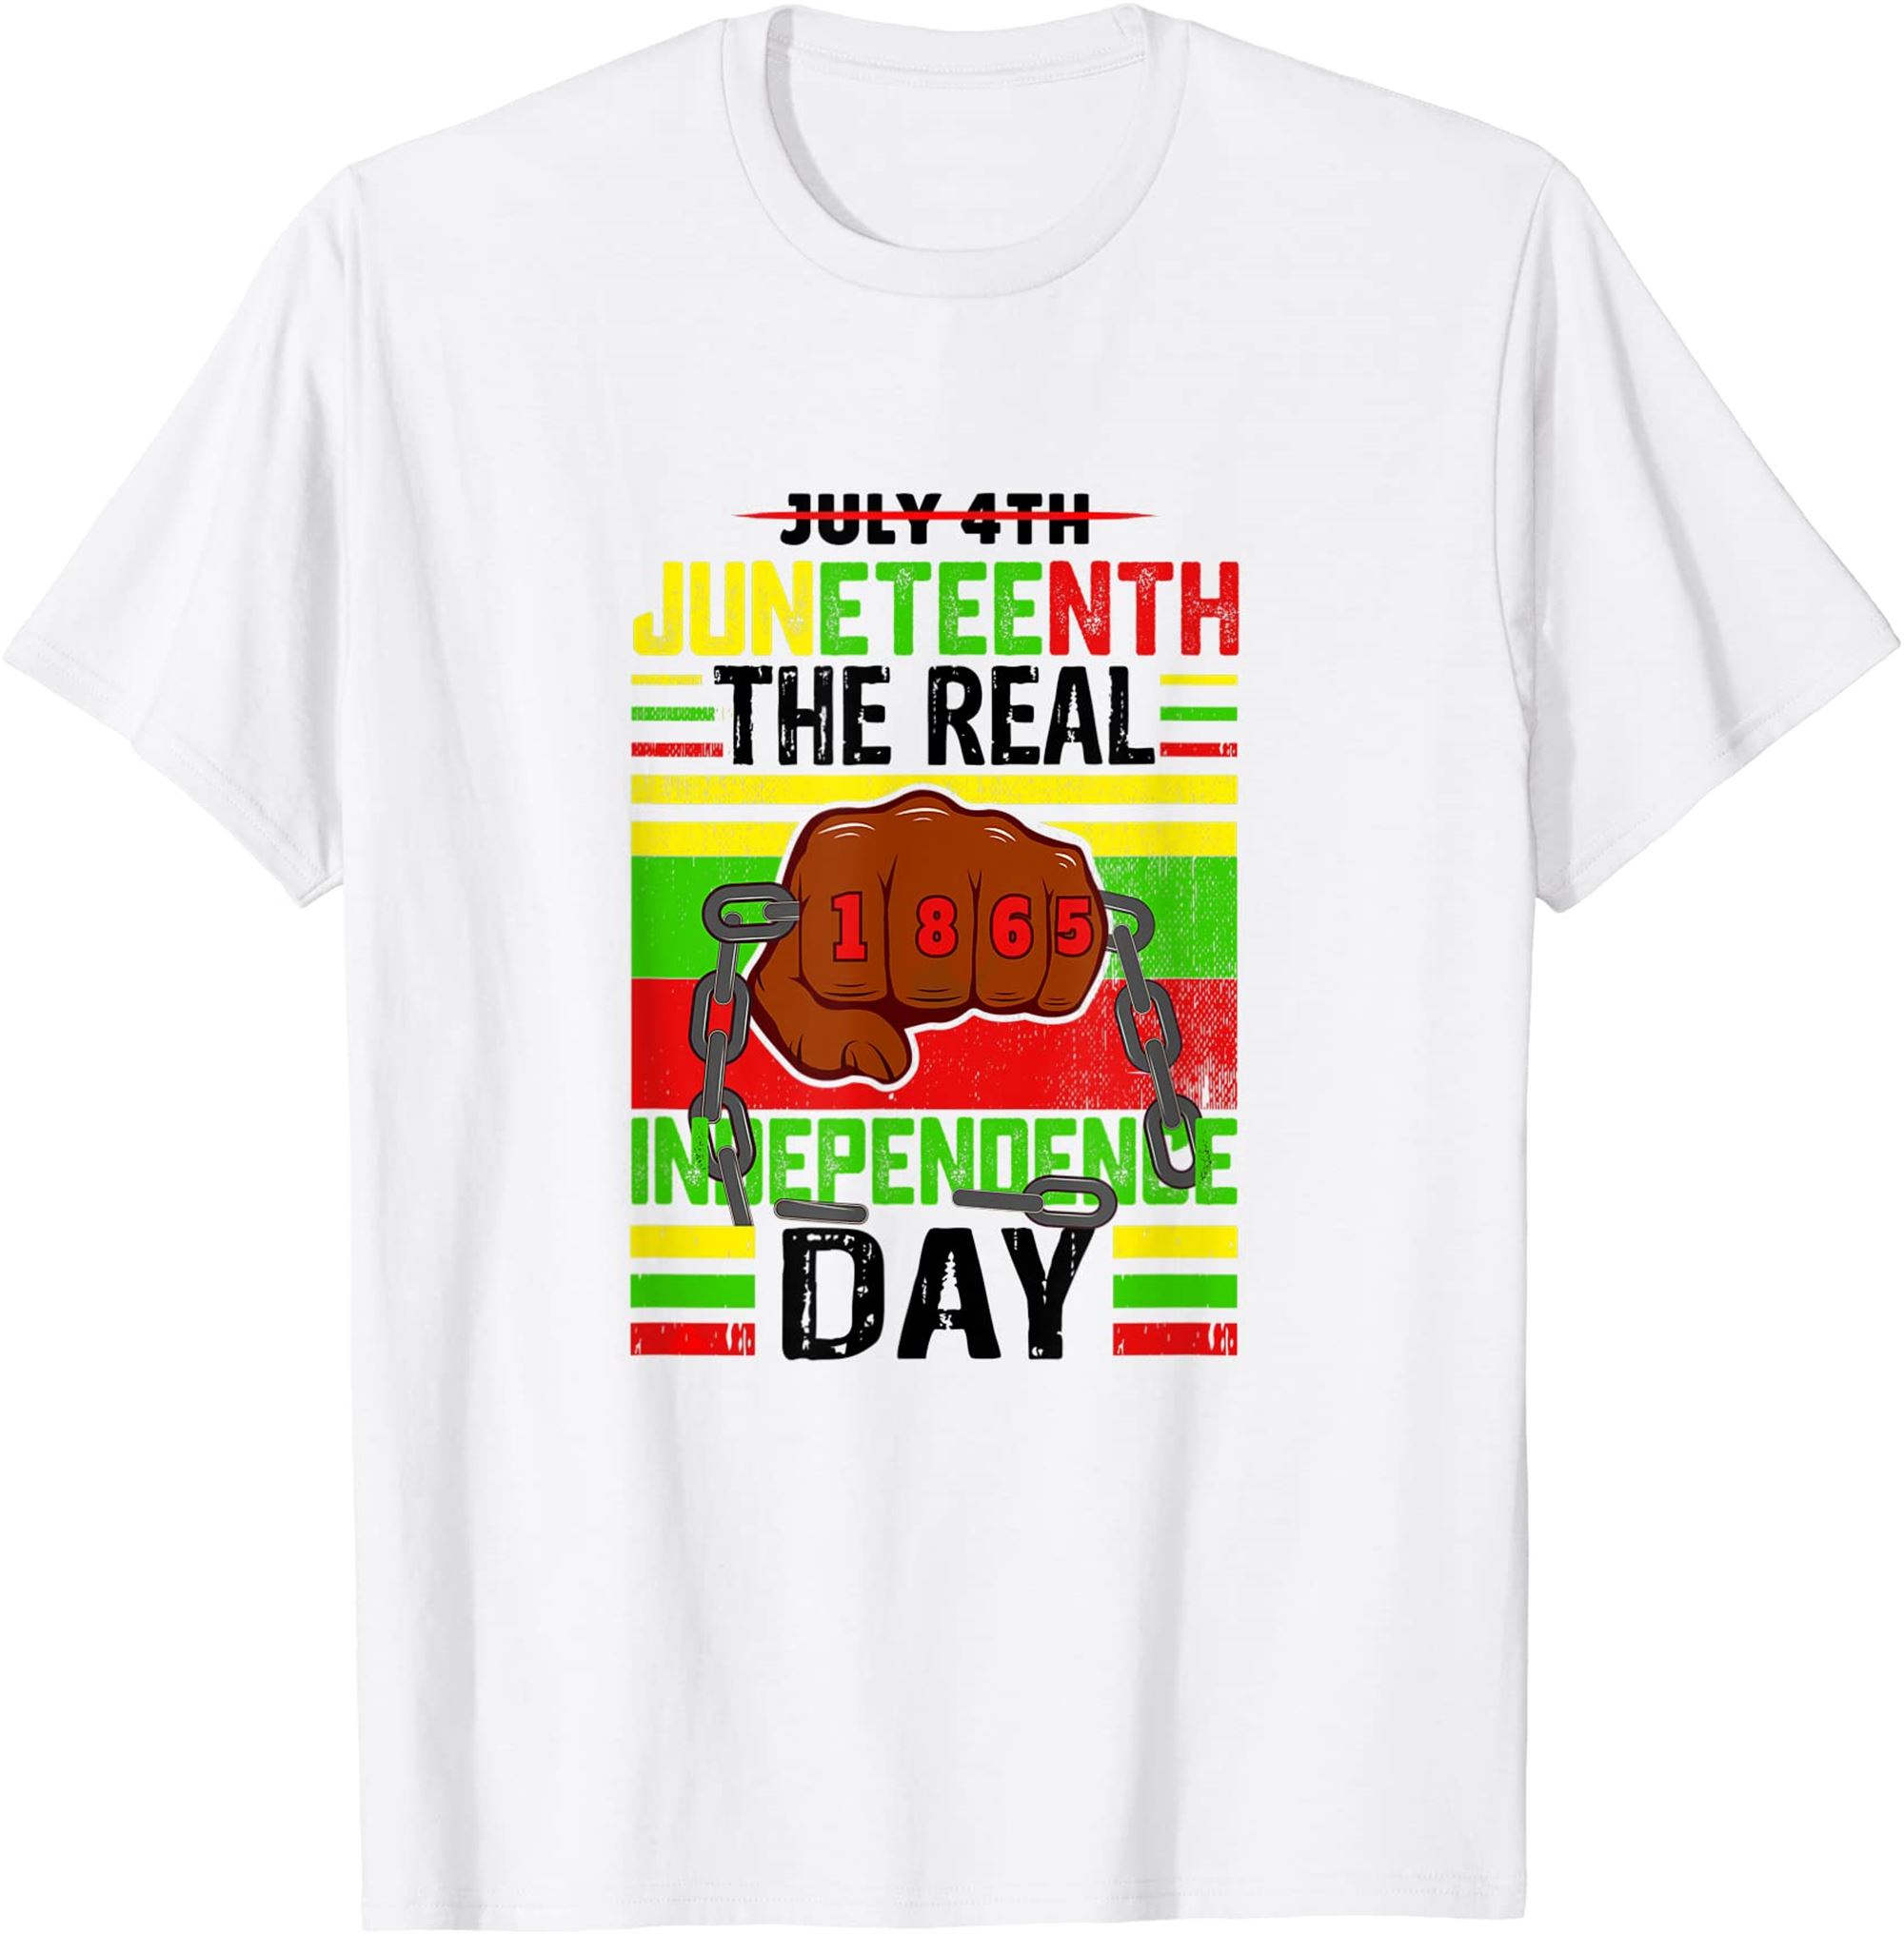 1865 Juneteenth Is My Independence Day For Black Women Men T-shirt Plus Size Up To 5xl